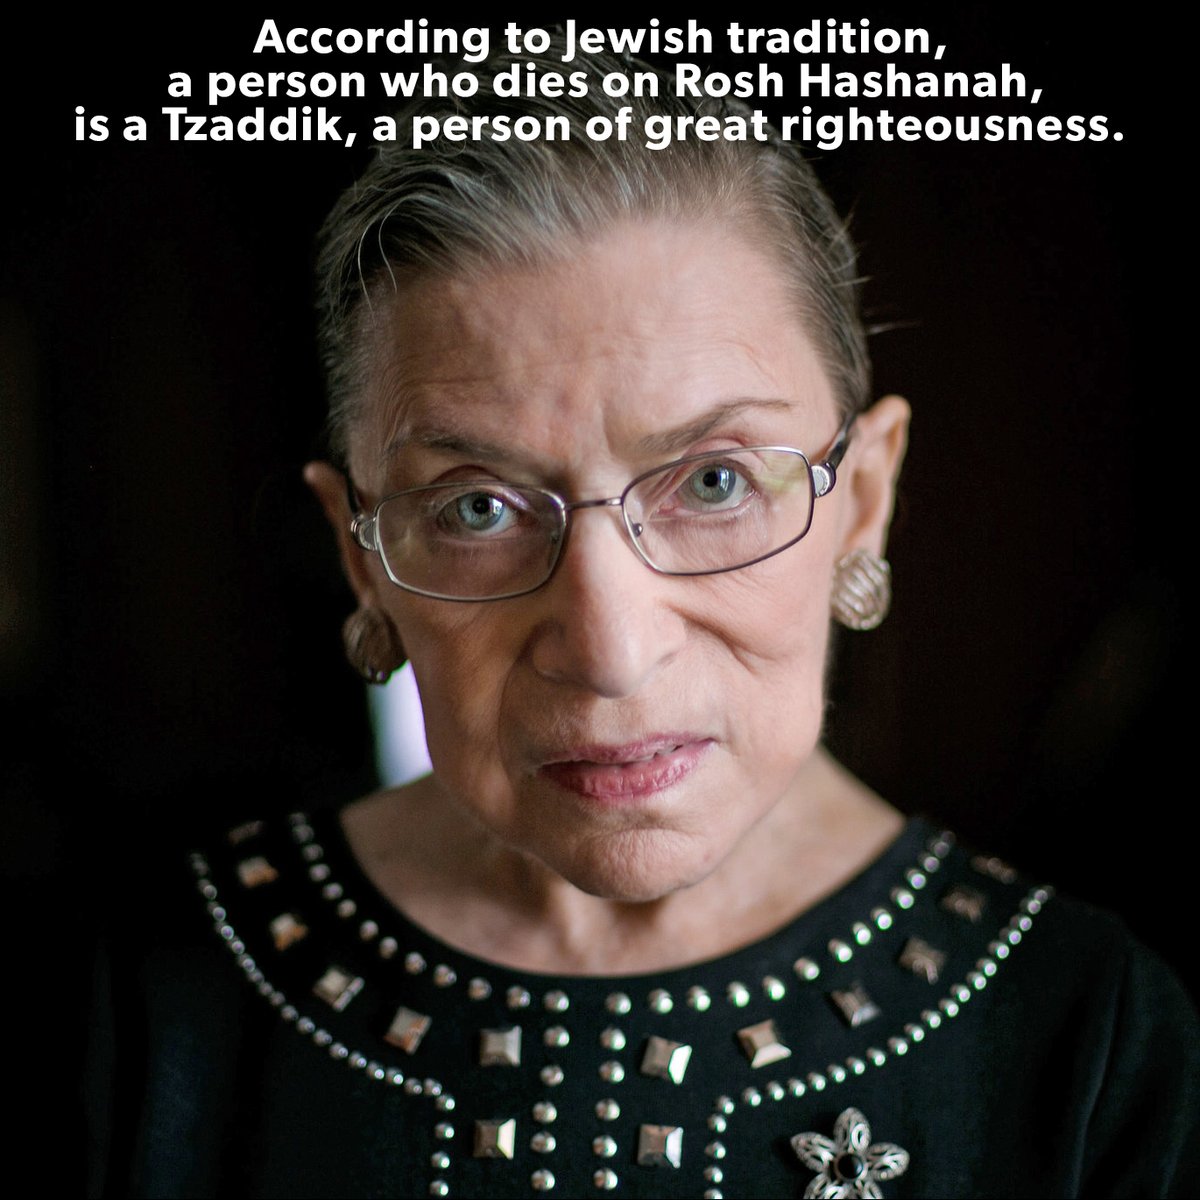 May we learn from her example. May we be strong to match her strength. May we fight powerfully for what we believe in. May we carry on her legacy. #Tzaddik #RBGRevolution #RuthBaderGinsburg